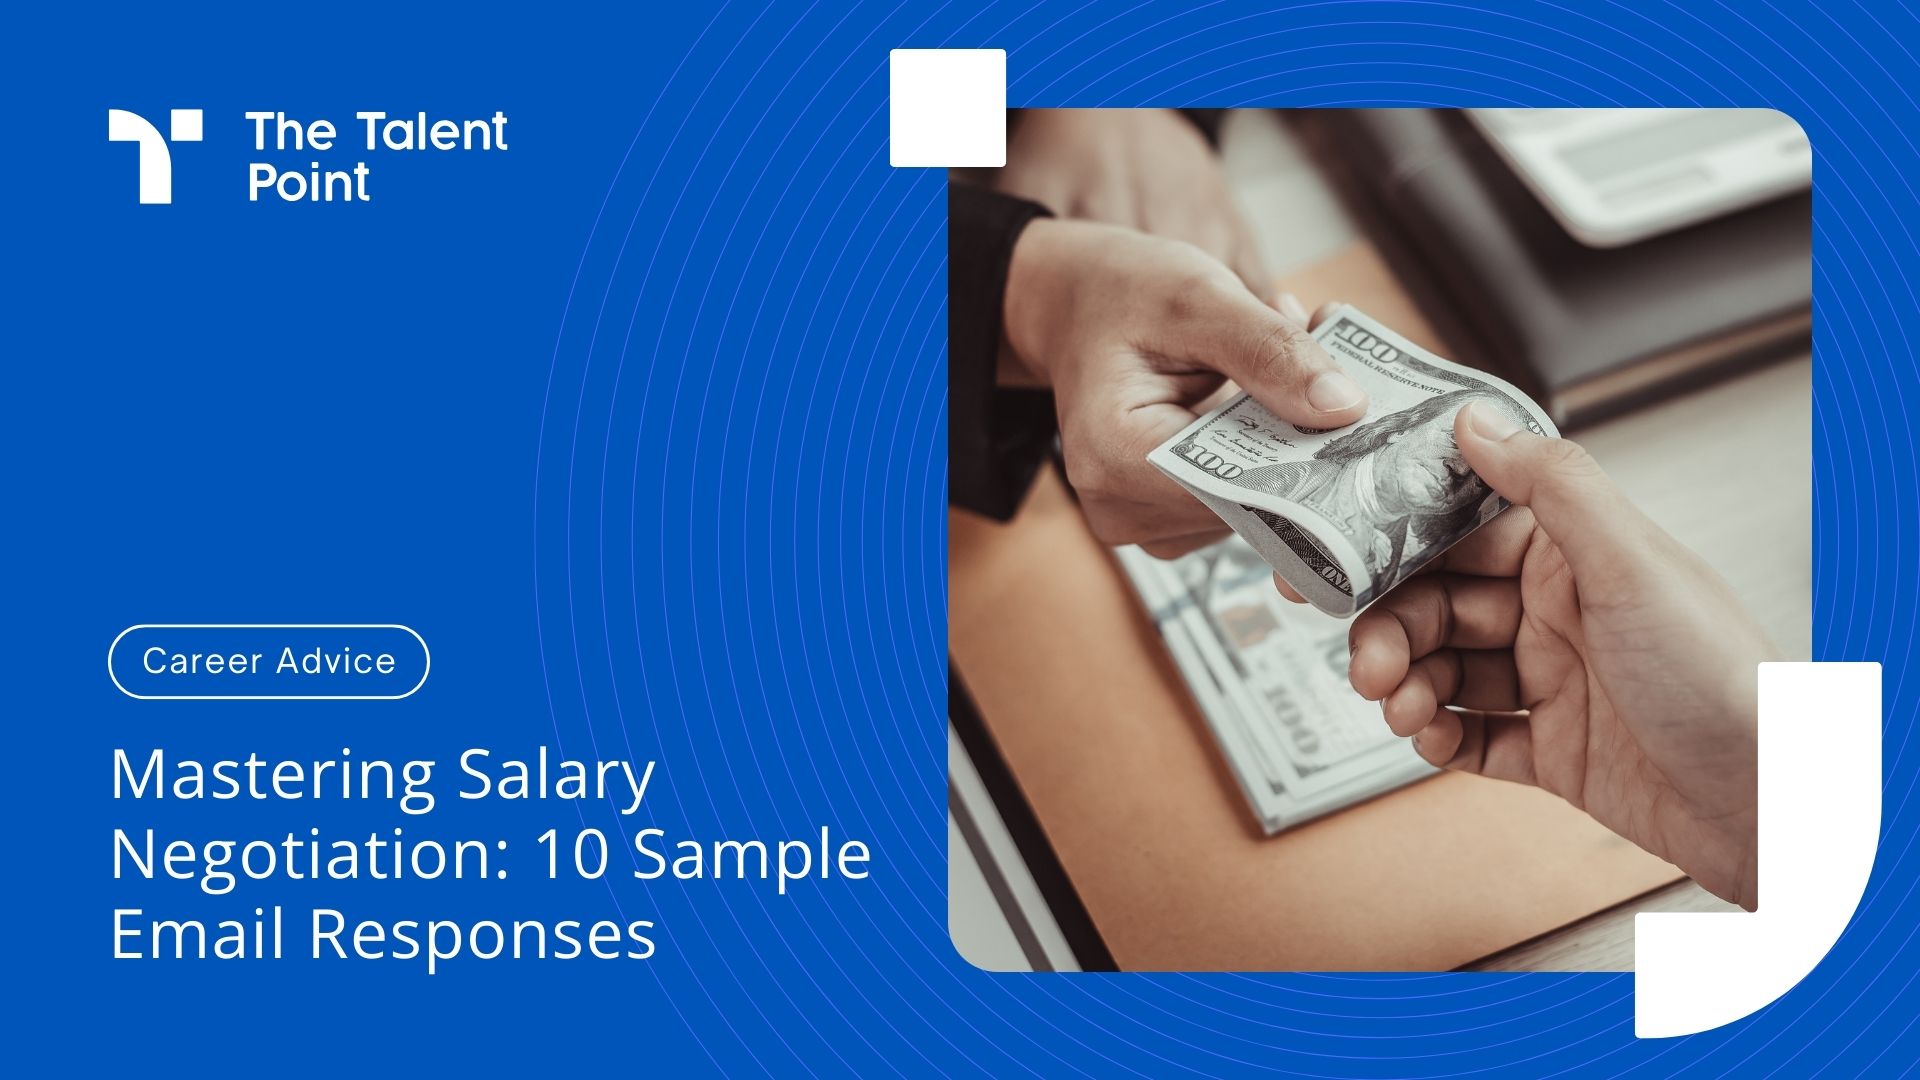 How to correspond salary negotiation offer via email with 10 sample - TalentPoint